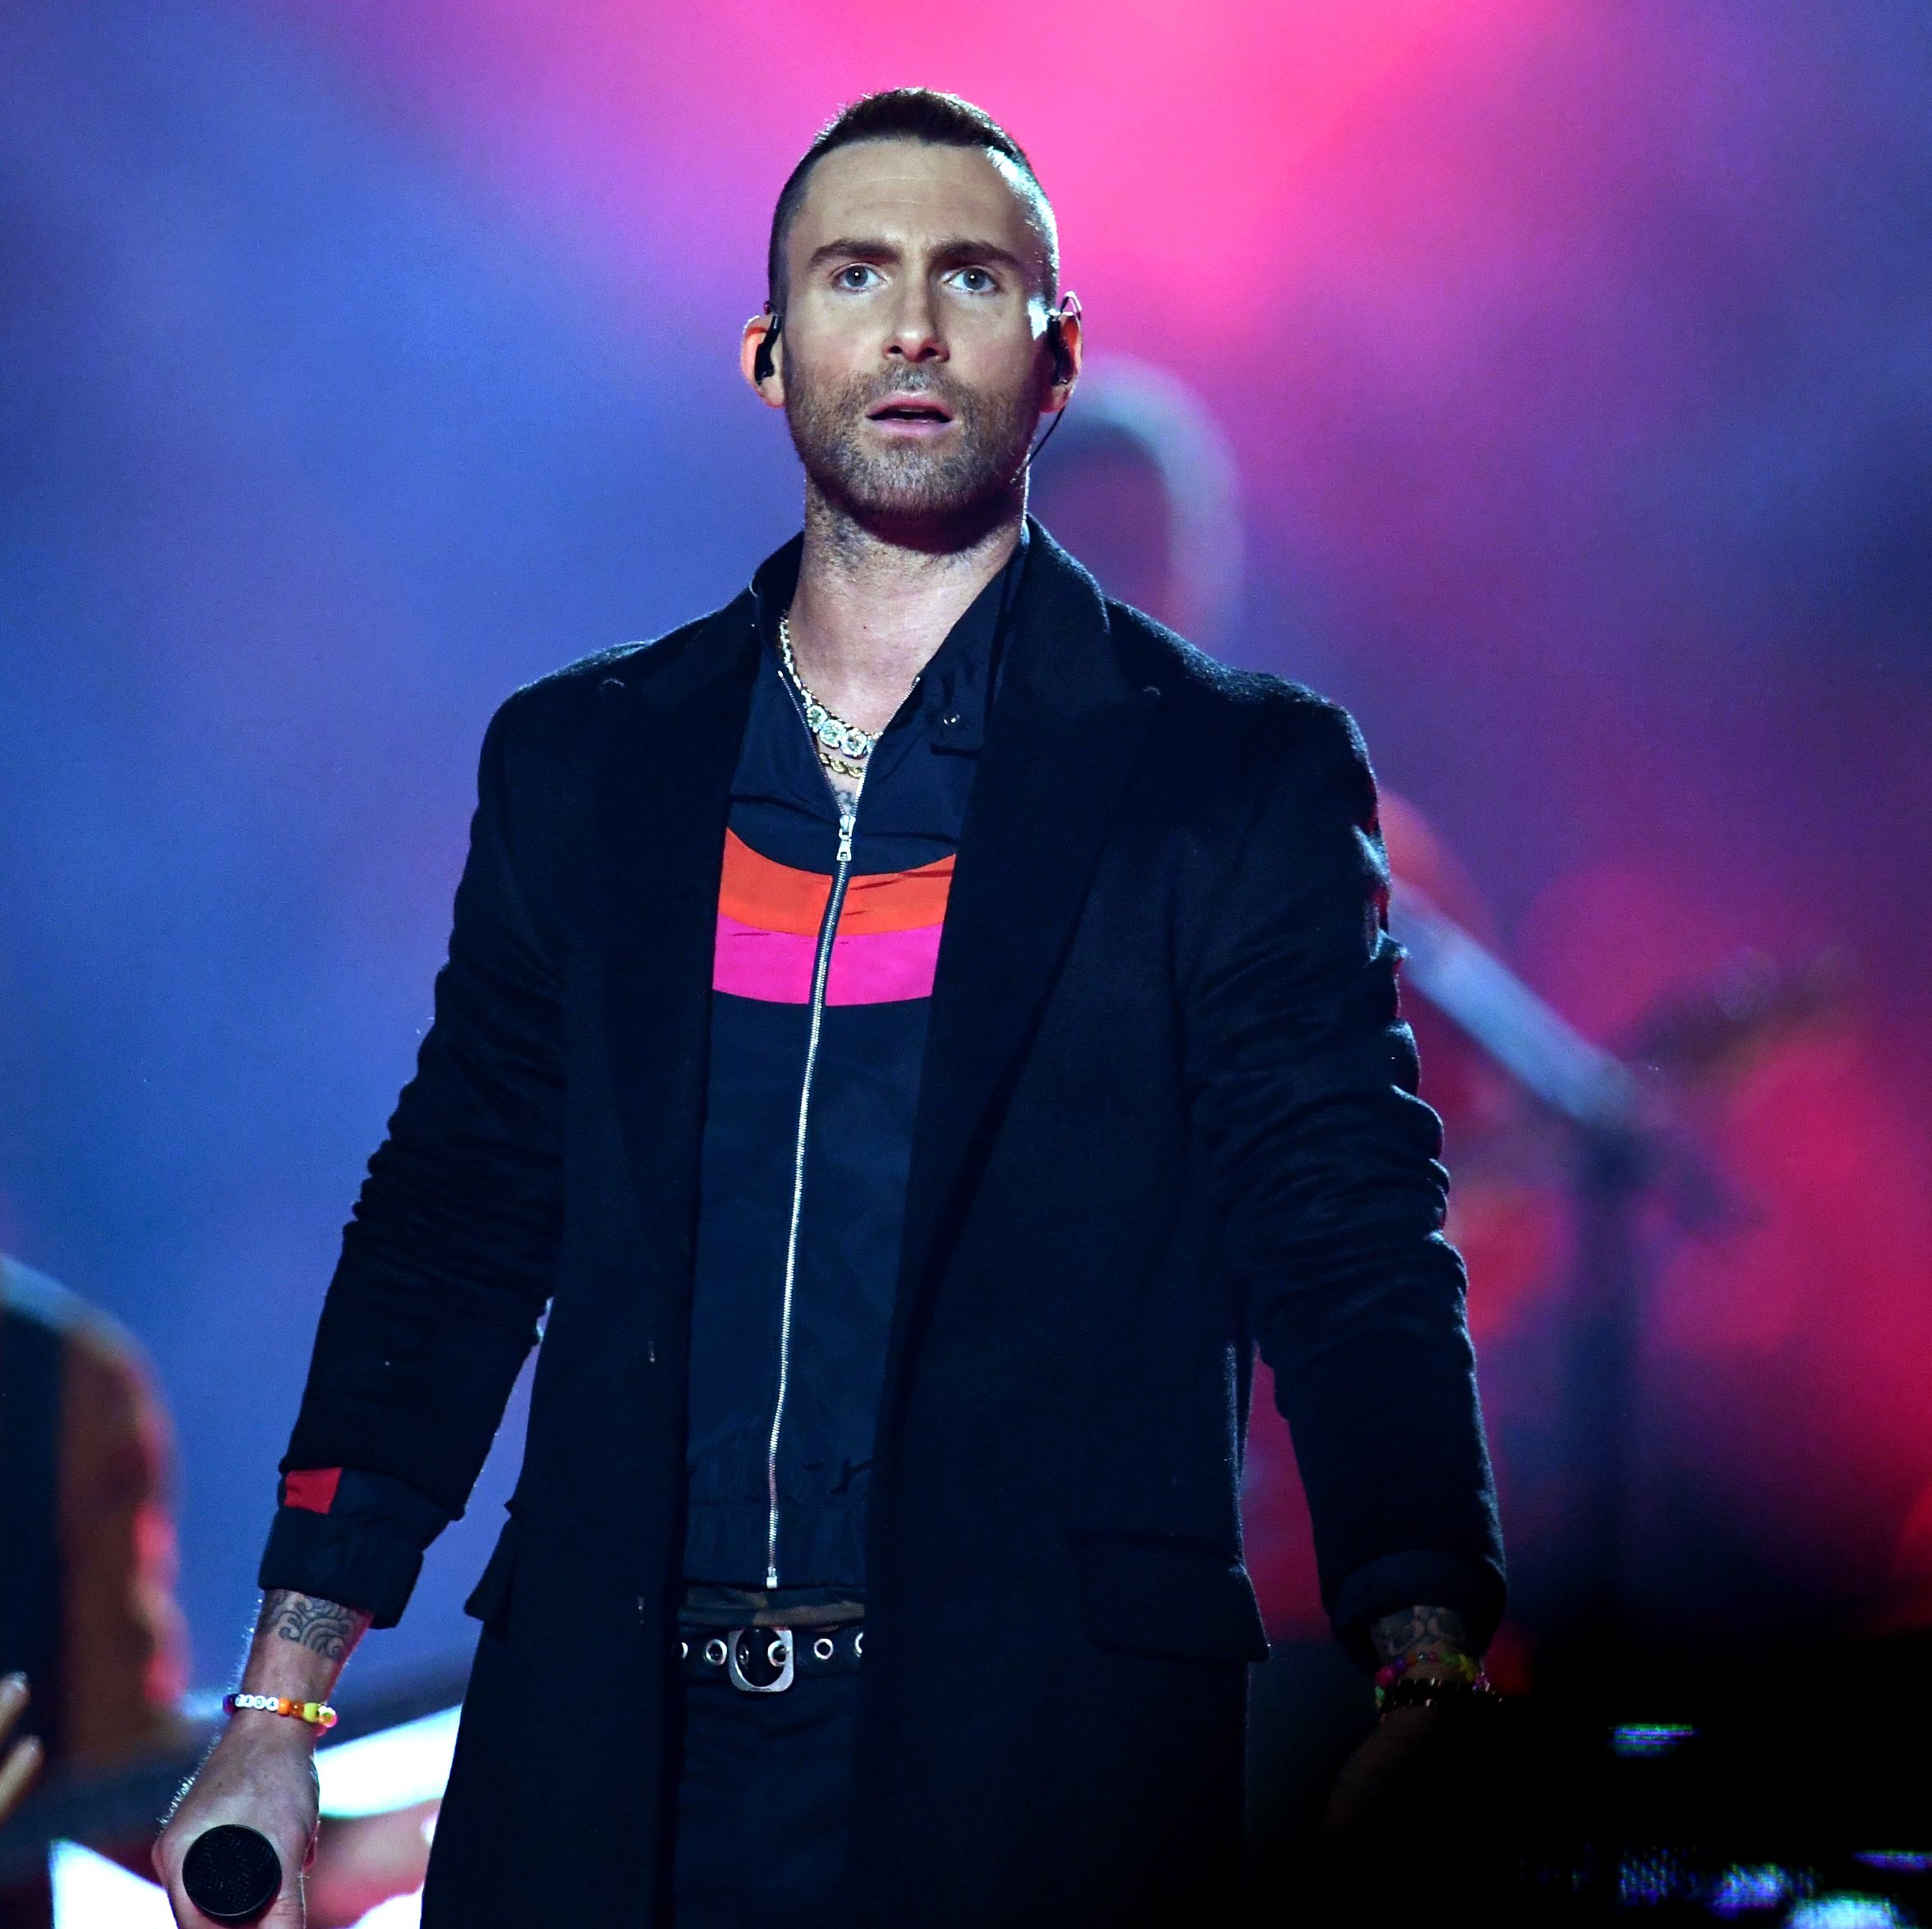 Source Says Adam Levine Was Being Flirtatious with Three Women and Craves 